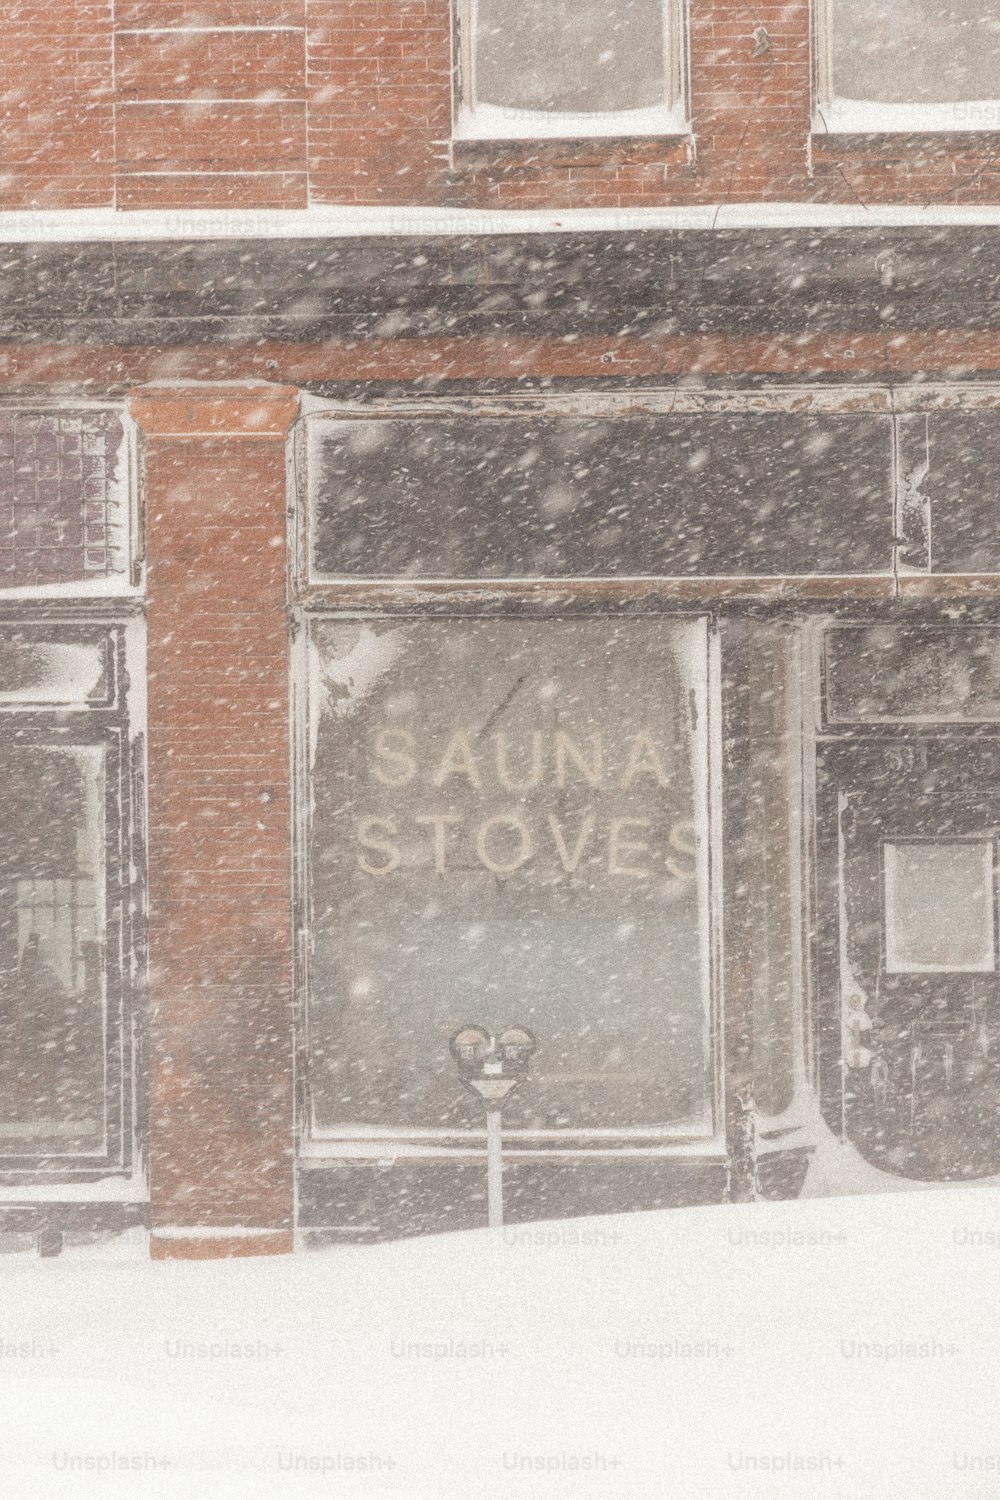 a store front covered in snow on a snowy day